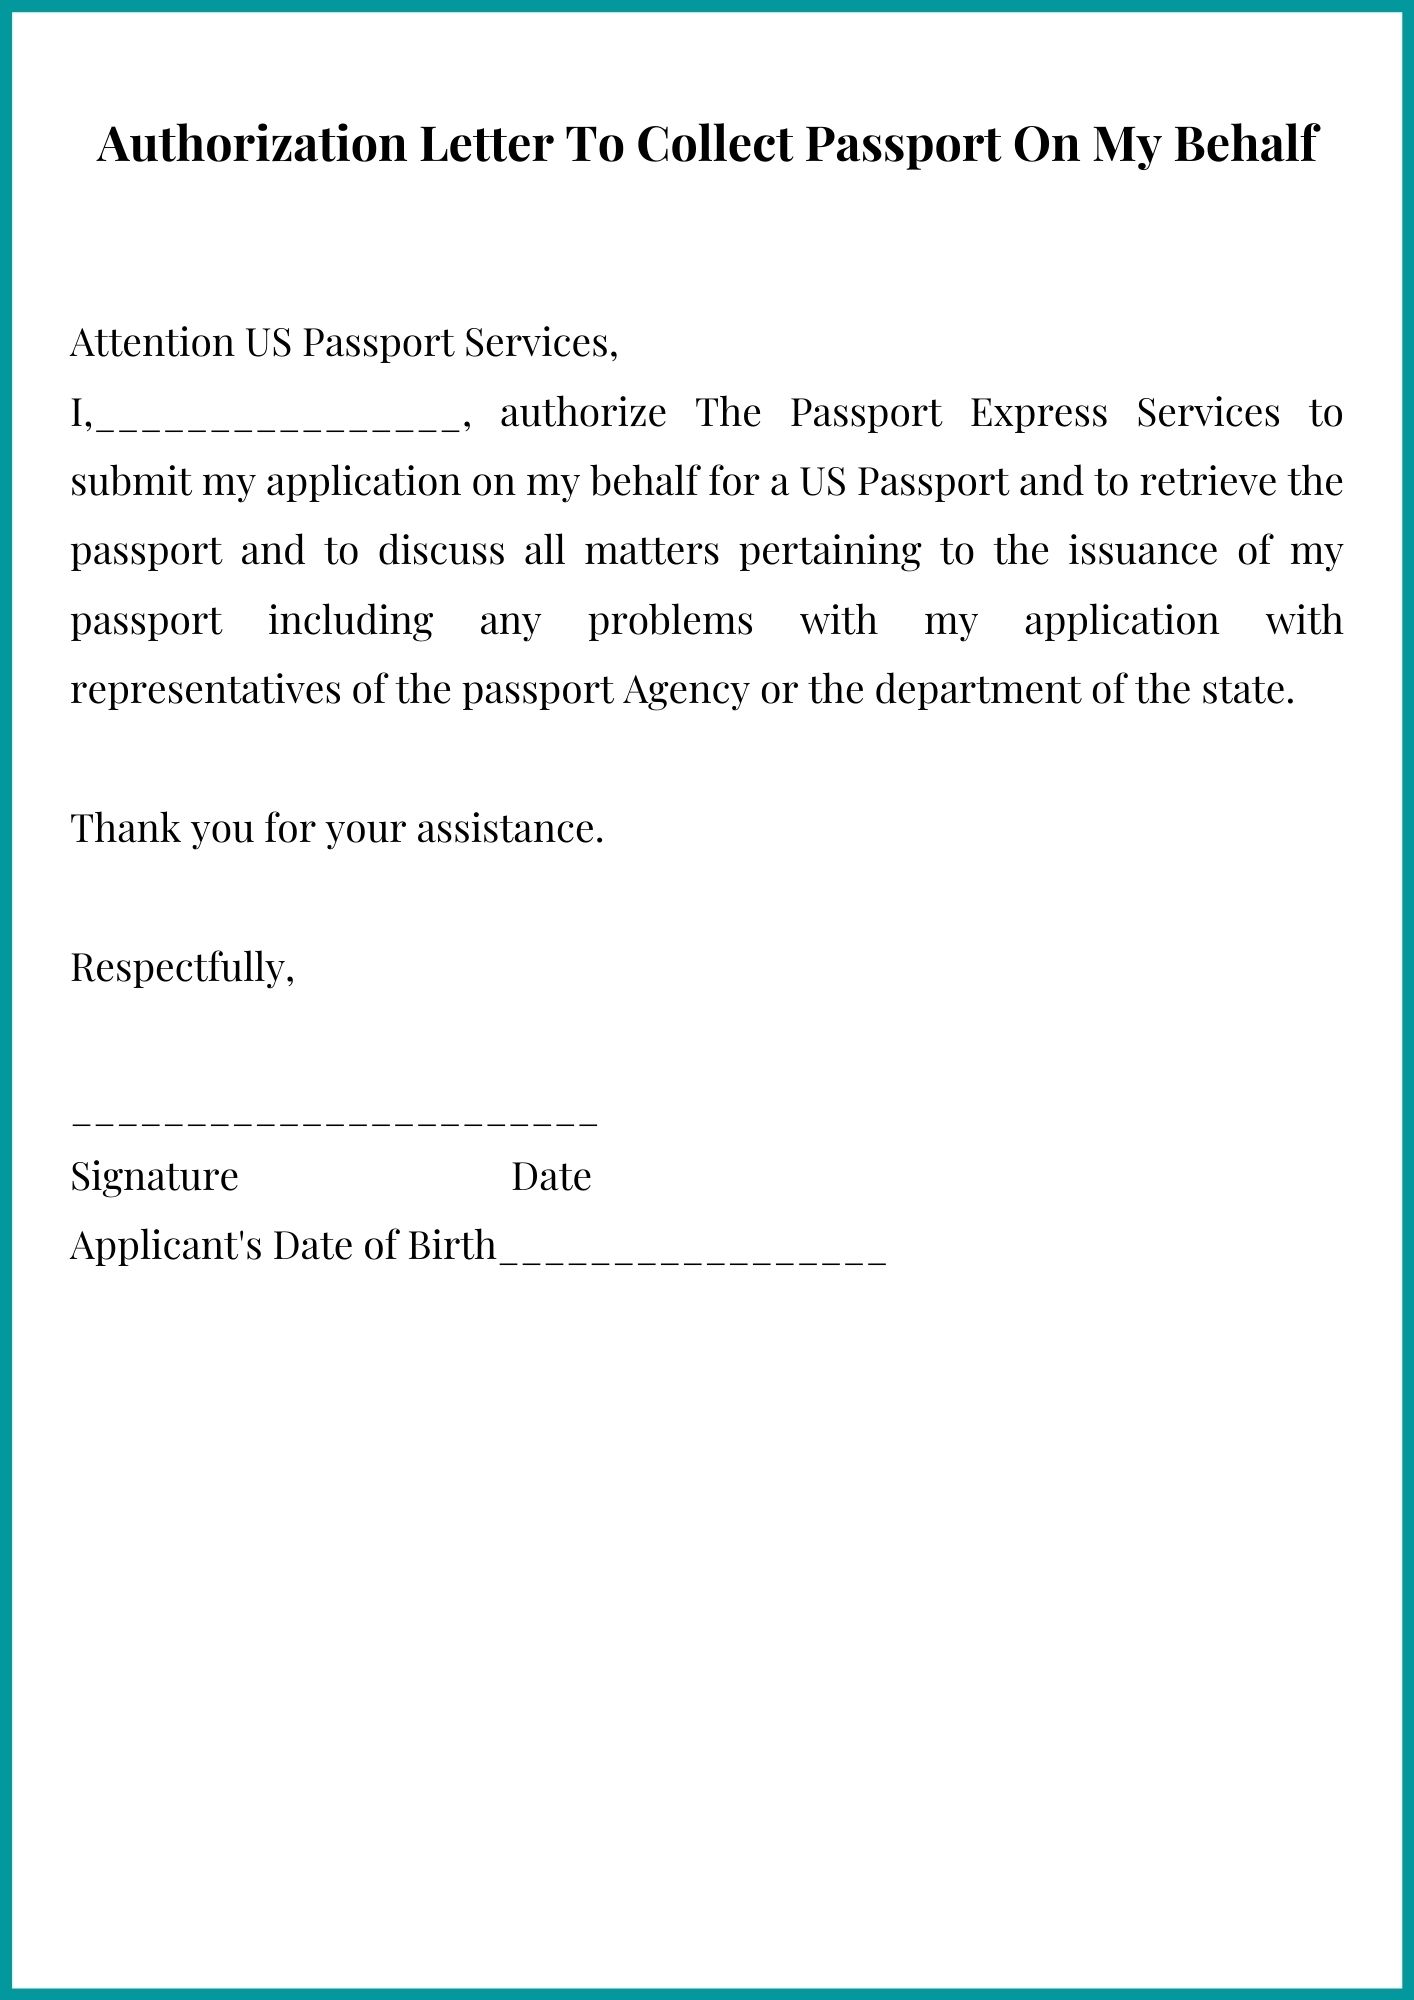 authorization-letter-for-getting-passport